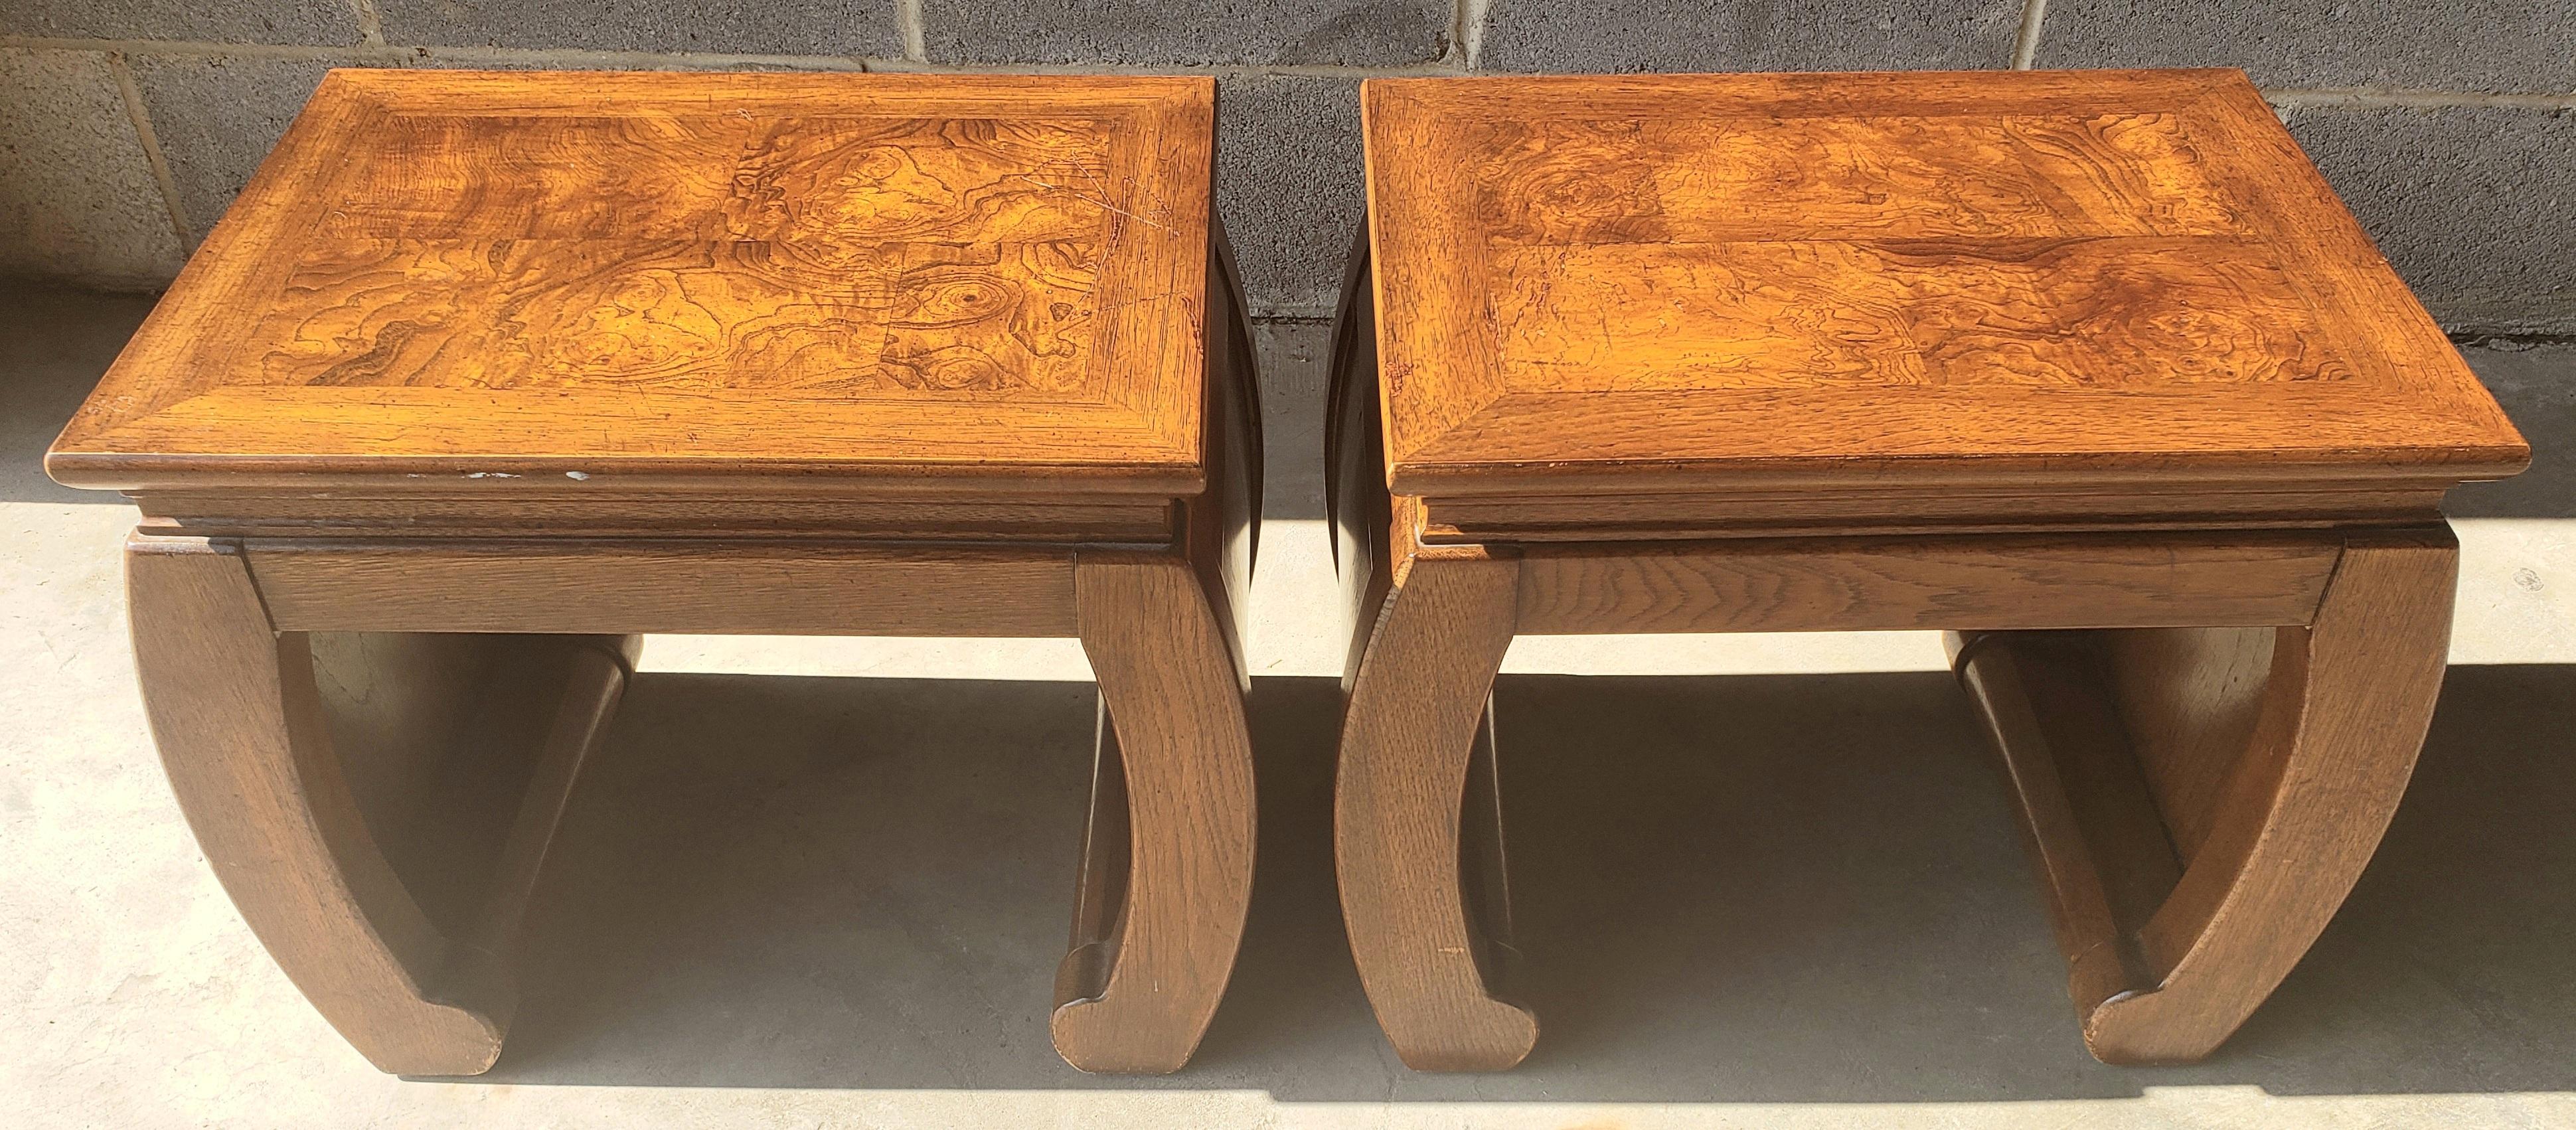 A pair Asian design fruitwood burl side tables by Gordon's Fine furniture of Tennessee.
Inlaid burl top. Very solid and heavy. Measurements are 18.5